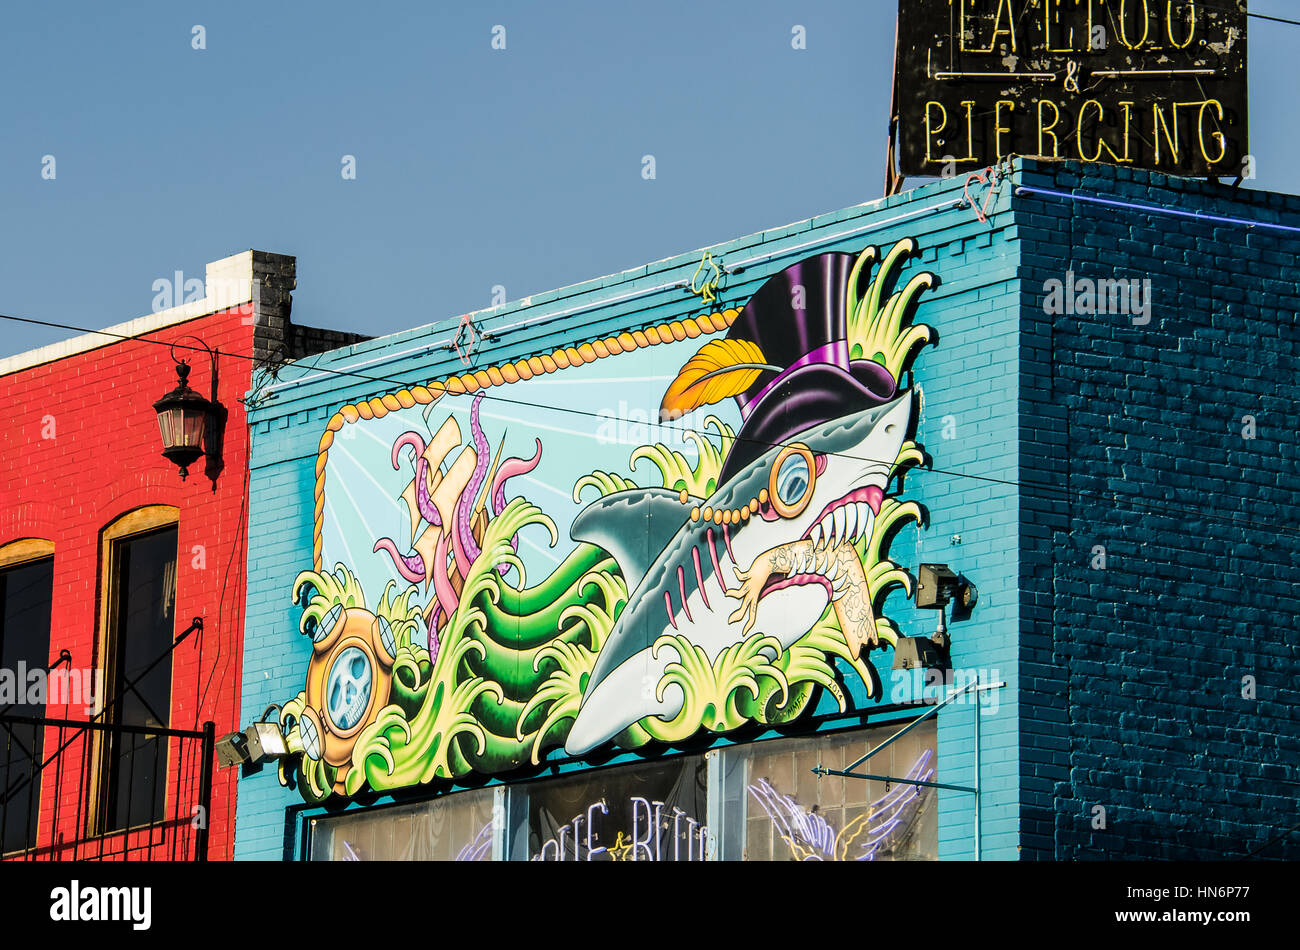 Austin, USA - July 19, 2015: Colorful tattoo and piercing store buildings on street in downtown Stock Photo